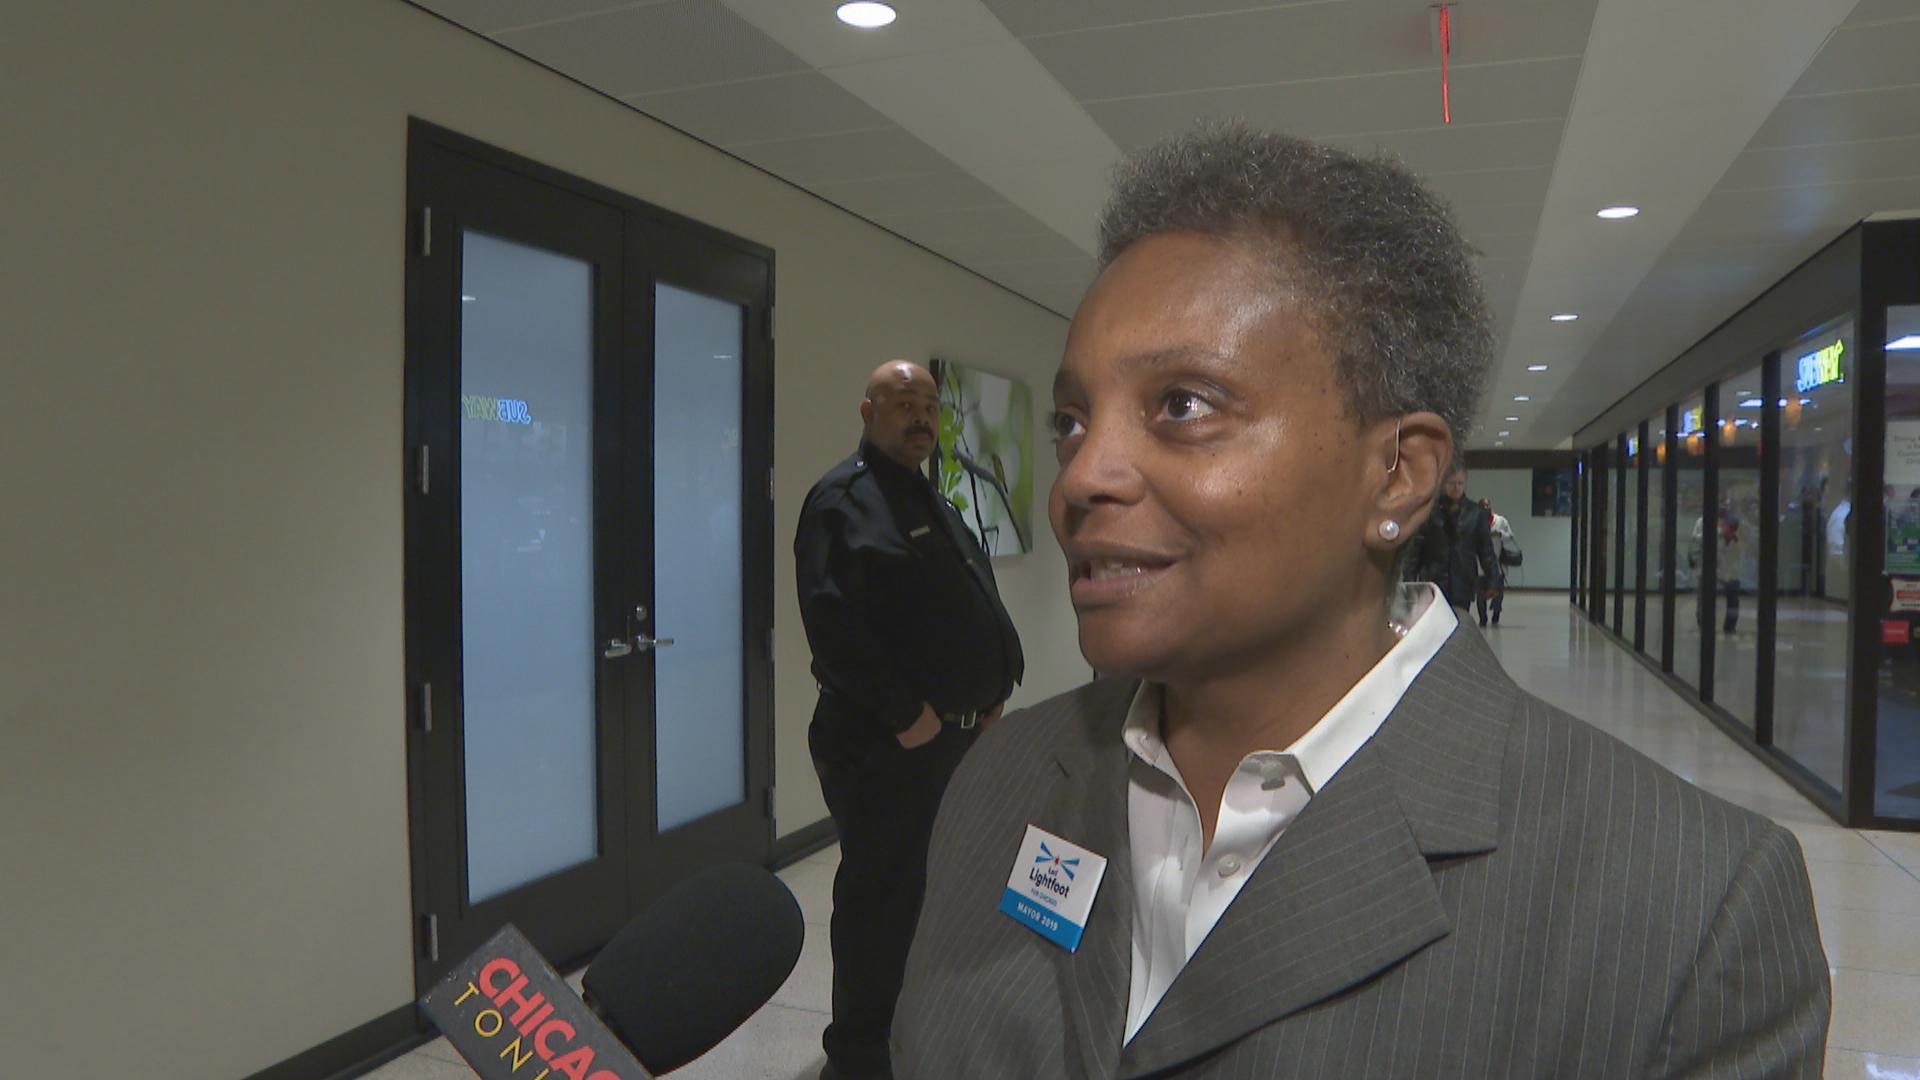 In this file photo, Lori Lightfoot, then a candidate for Chicago mayor, speaks to “Chicago Tonight” on Monday, Dec. 17, 2018.